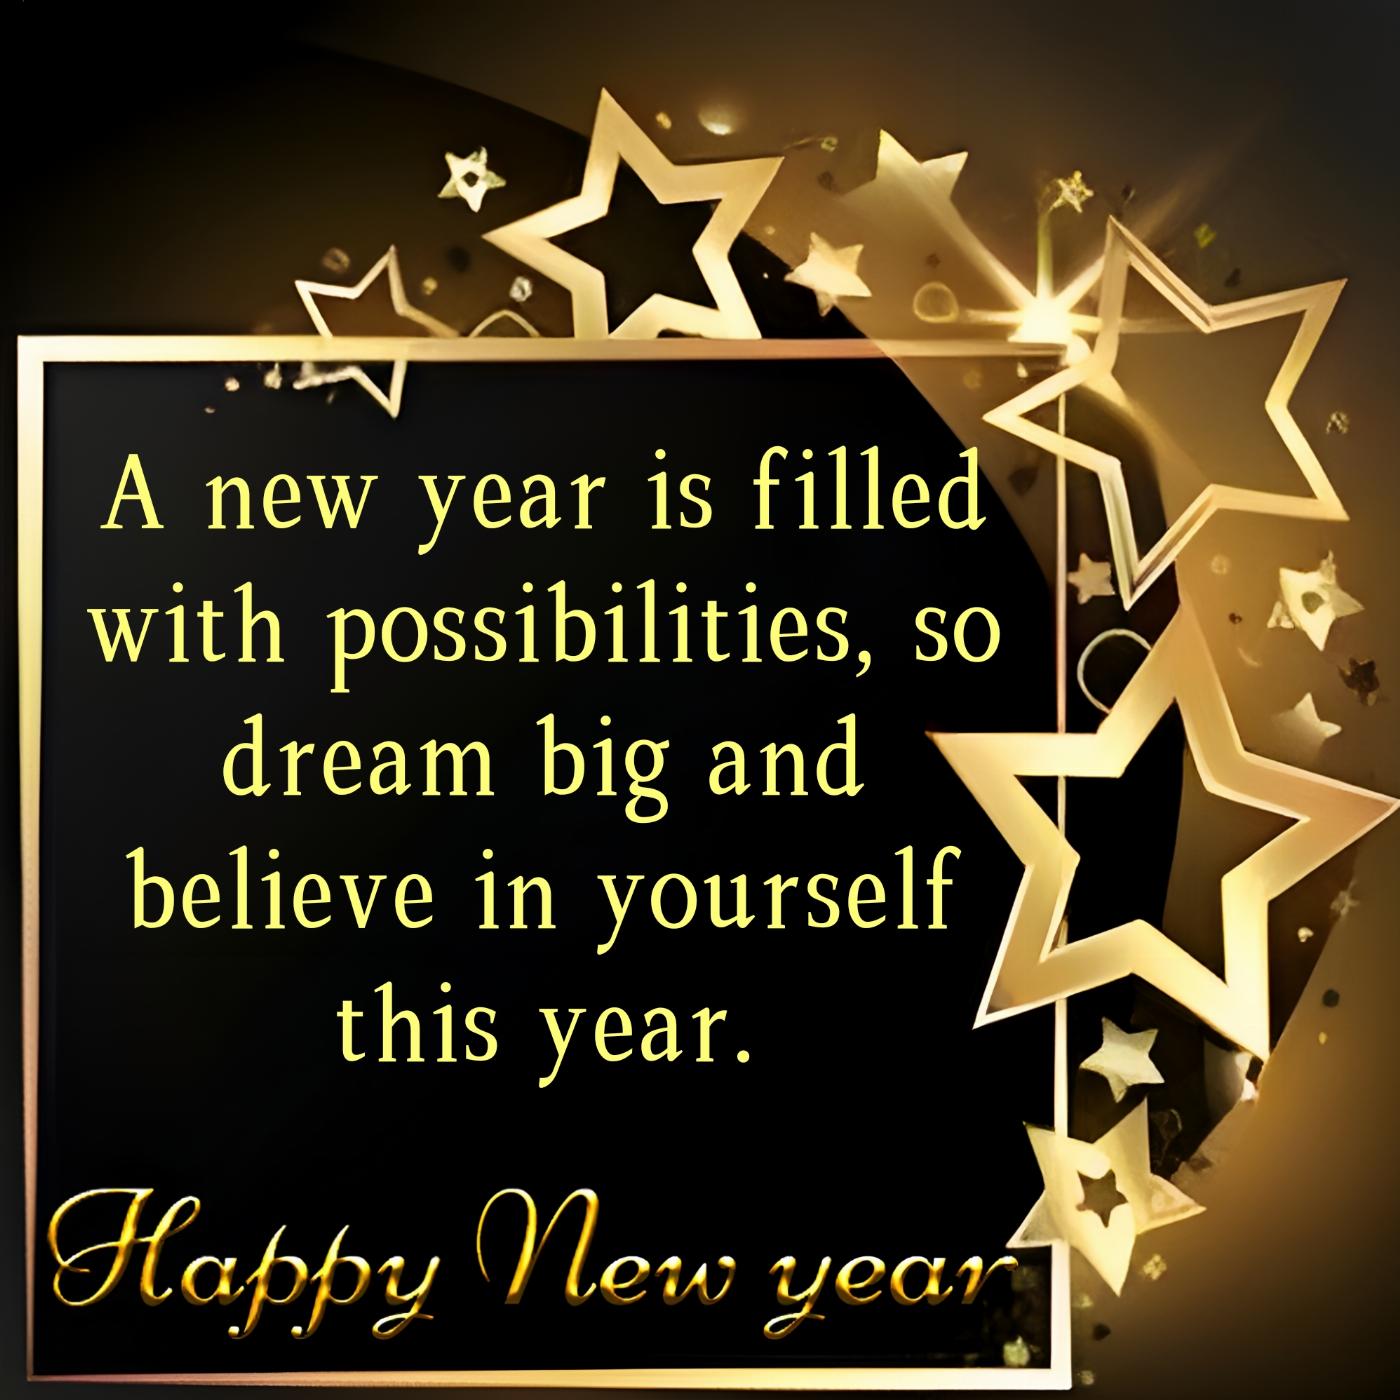 A new year is filled with possibilities so dream big